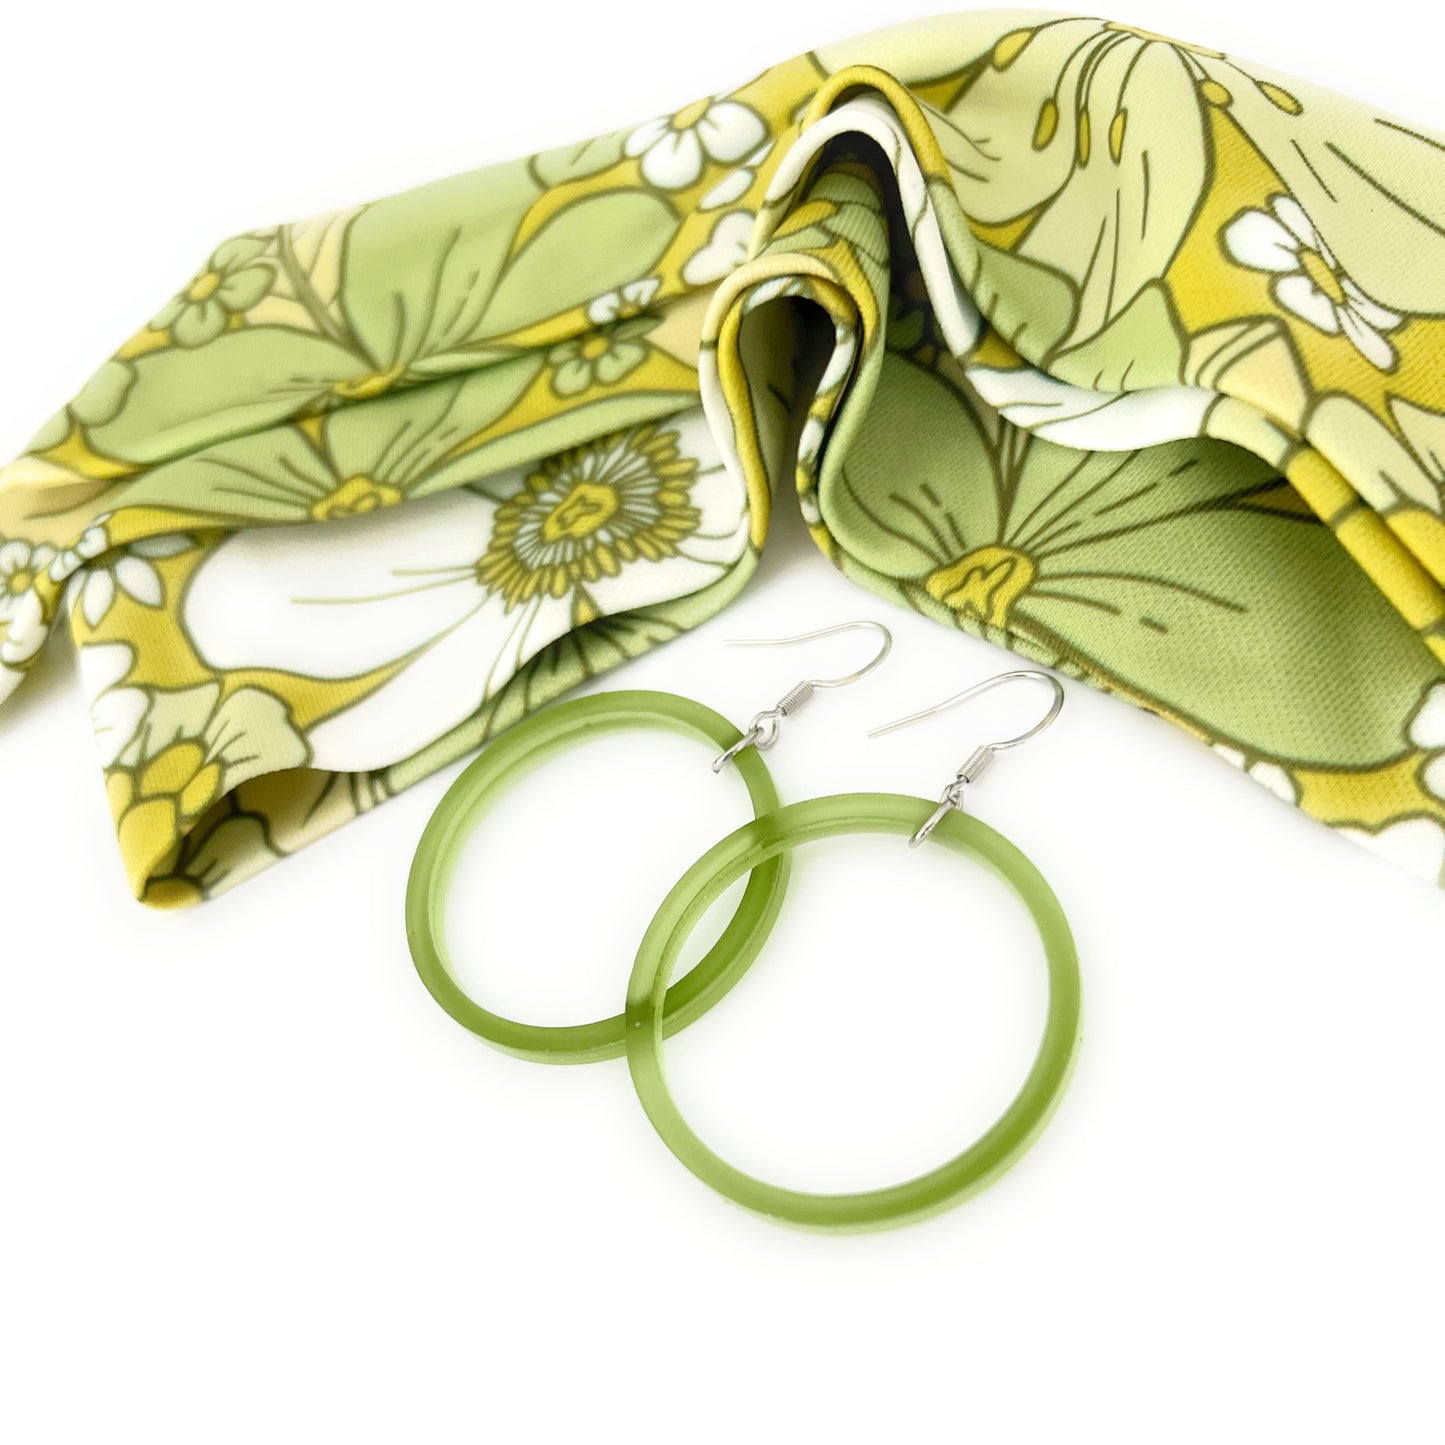 THE BEST EARRINGS/HEADBAND Gift Set in Retro Mustard Yellow & Green Floral + Hoops/ Statement Accessories